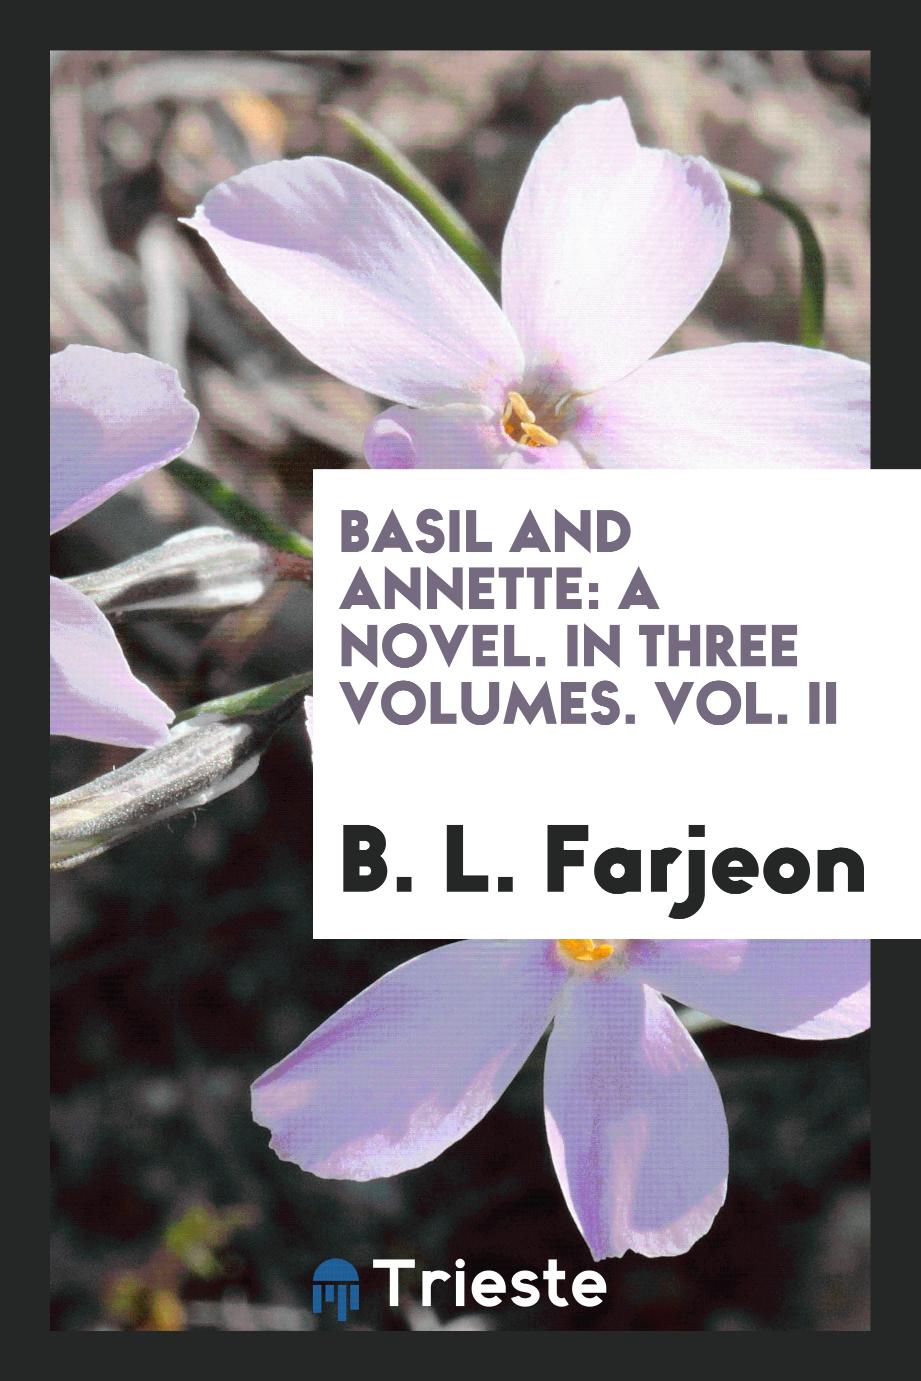 Basil and Annette: A Novel. In Three Volumes. Vol. II